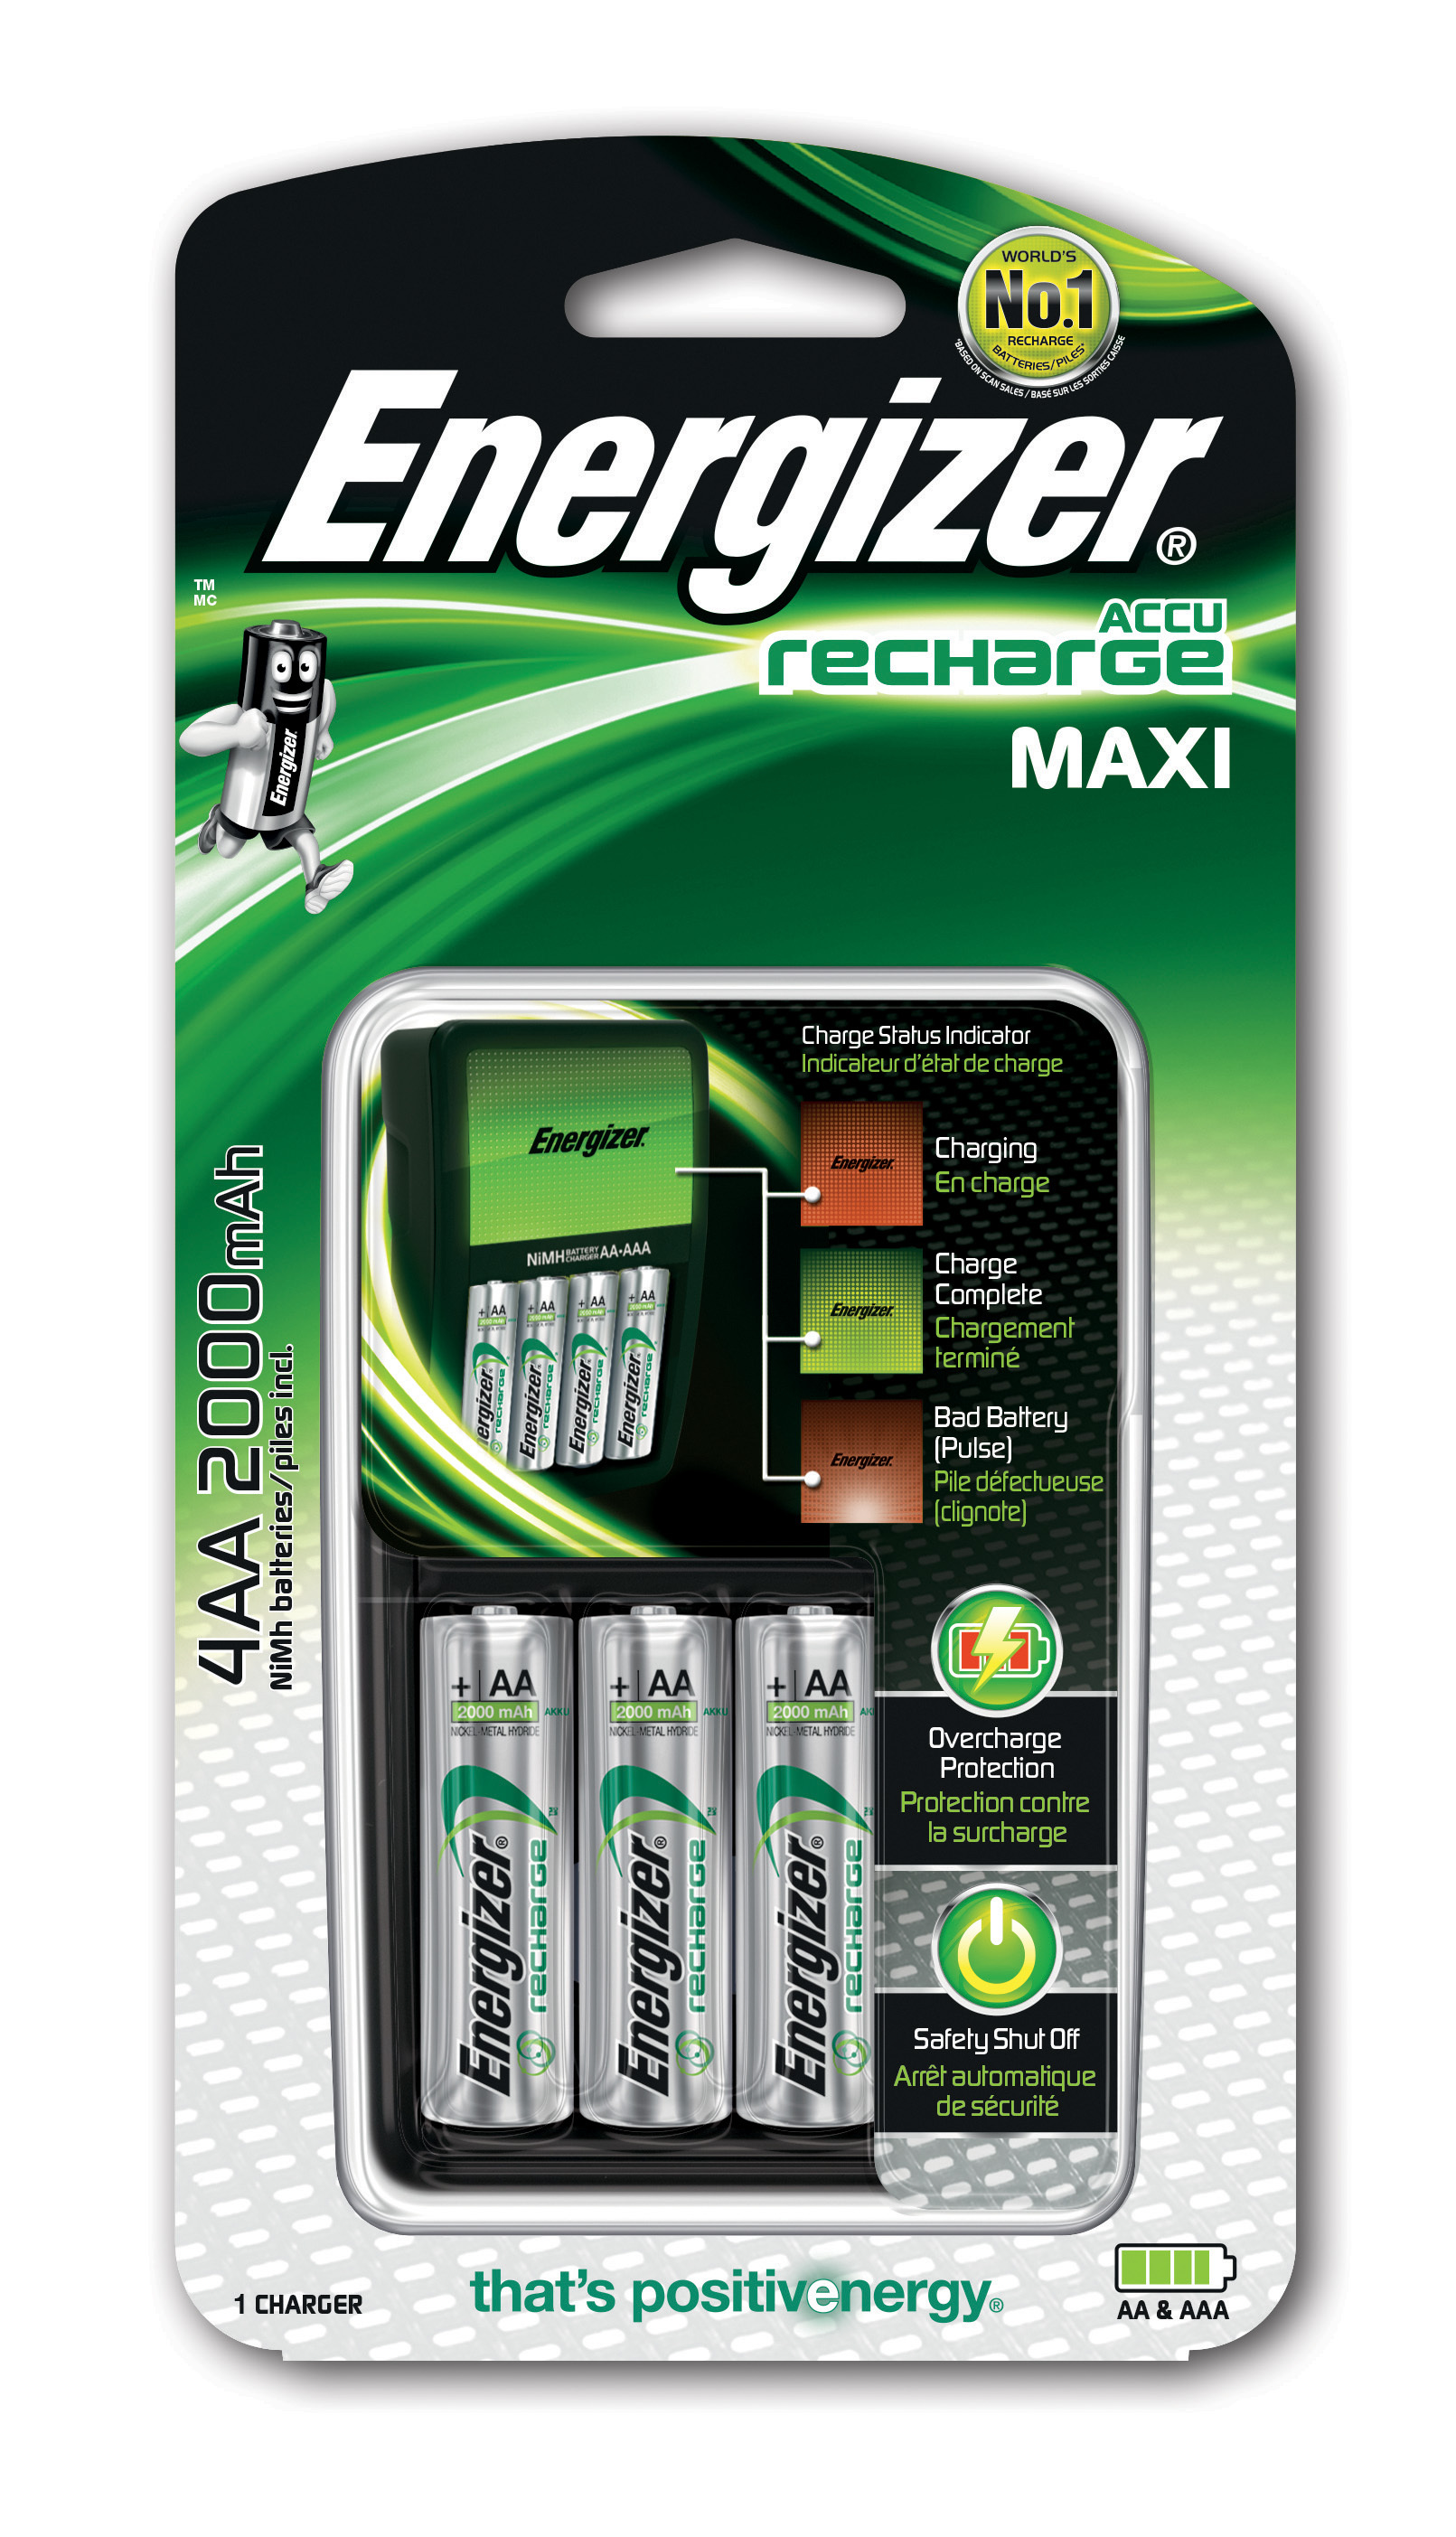 Energizer Maxi Charger